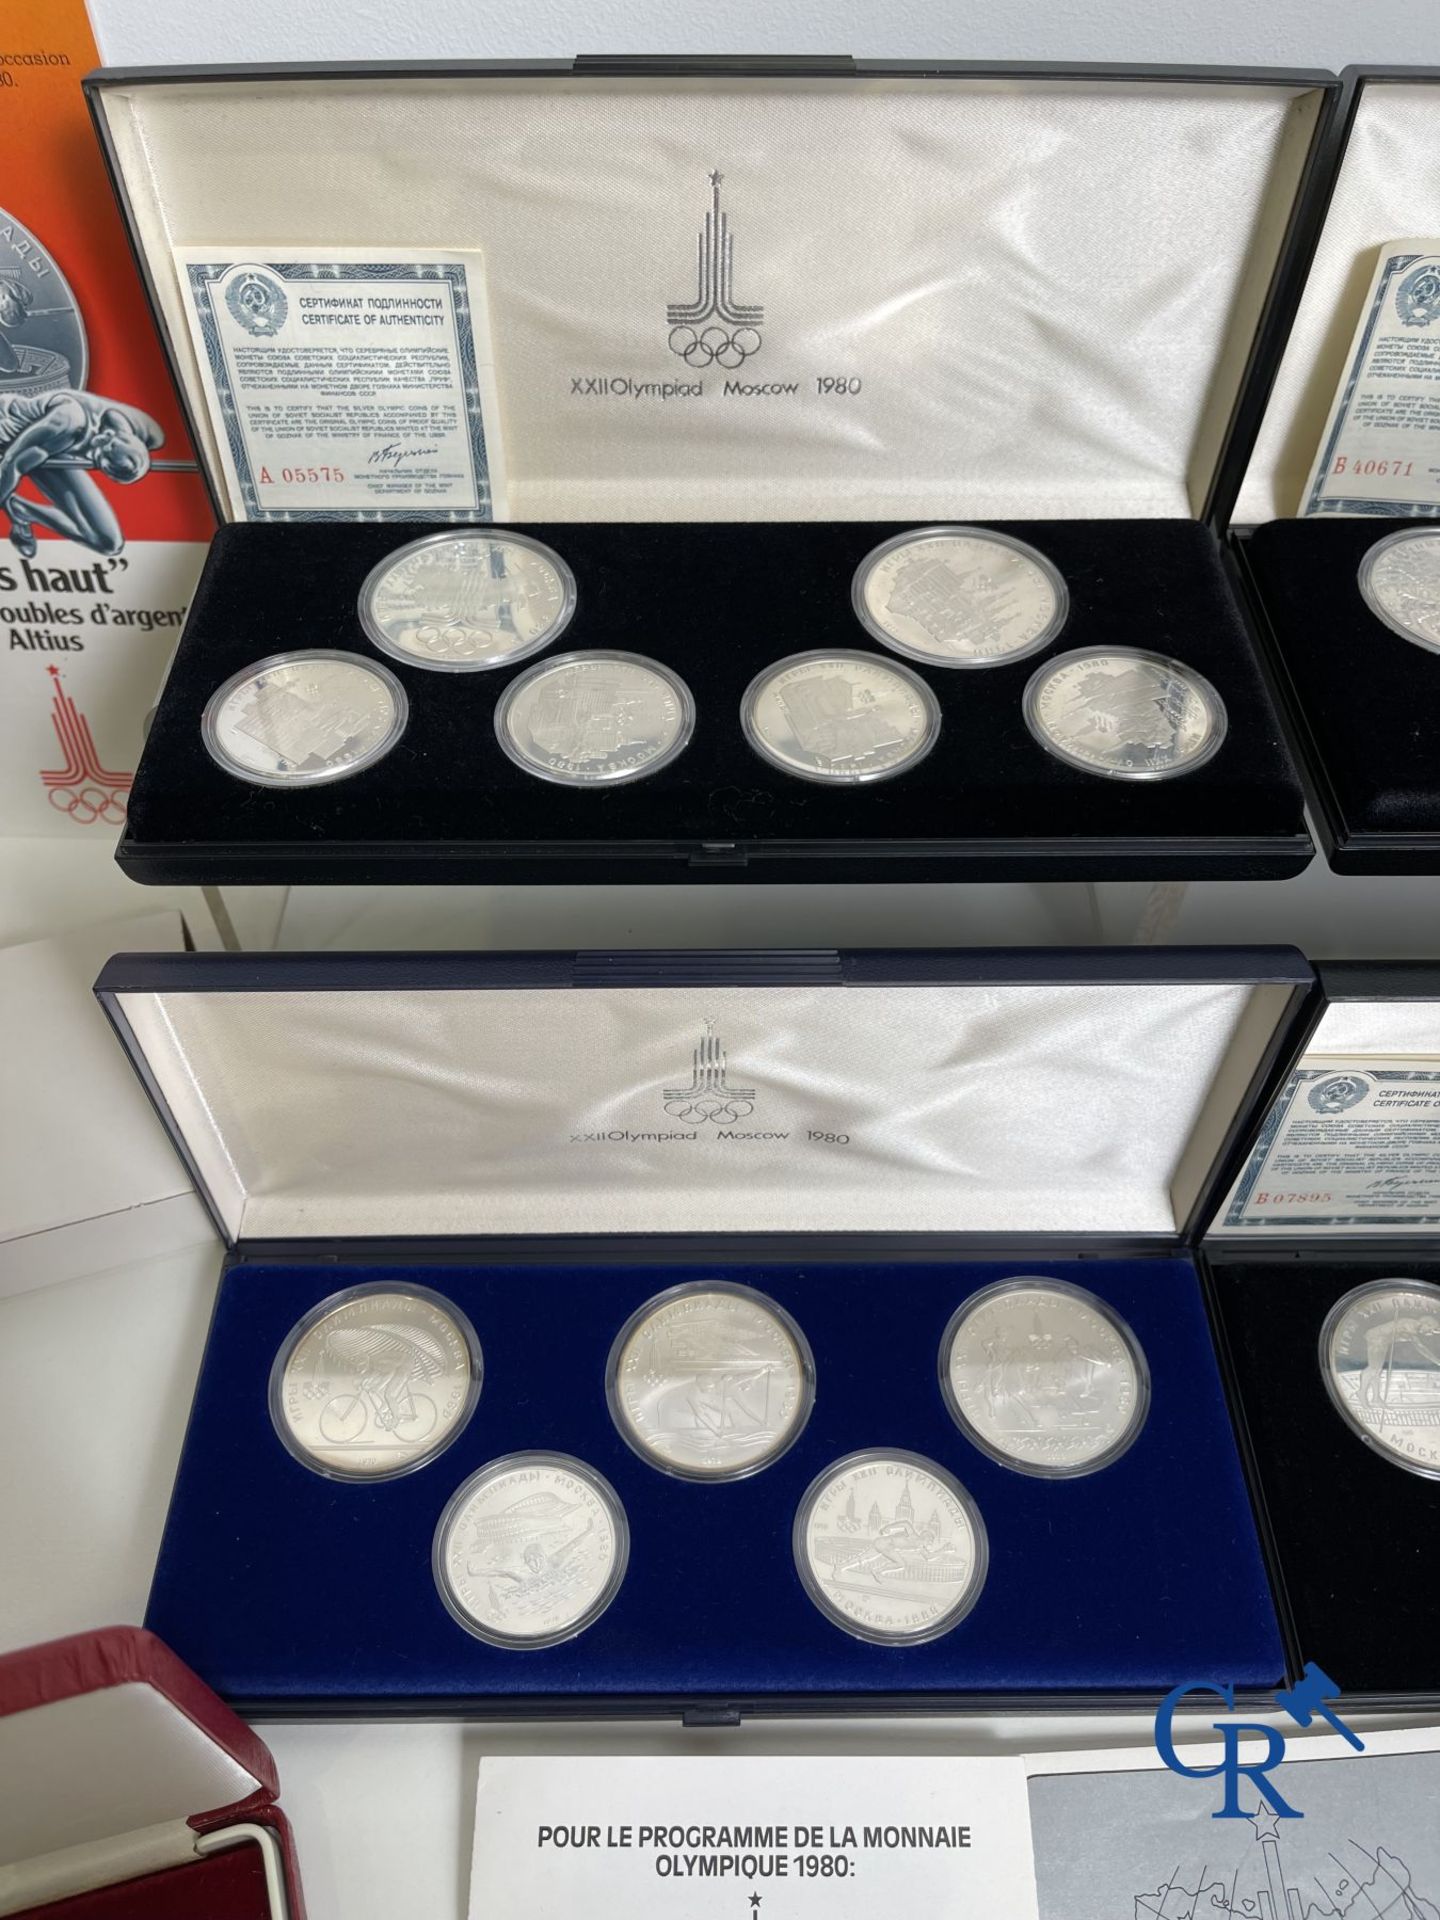 Silver coins: 6 boxes of 34 silver Rubles. "Monnaie Olympique Moscou 1980" - Image 2 of 6